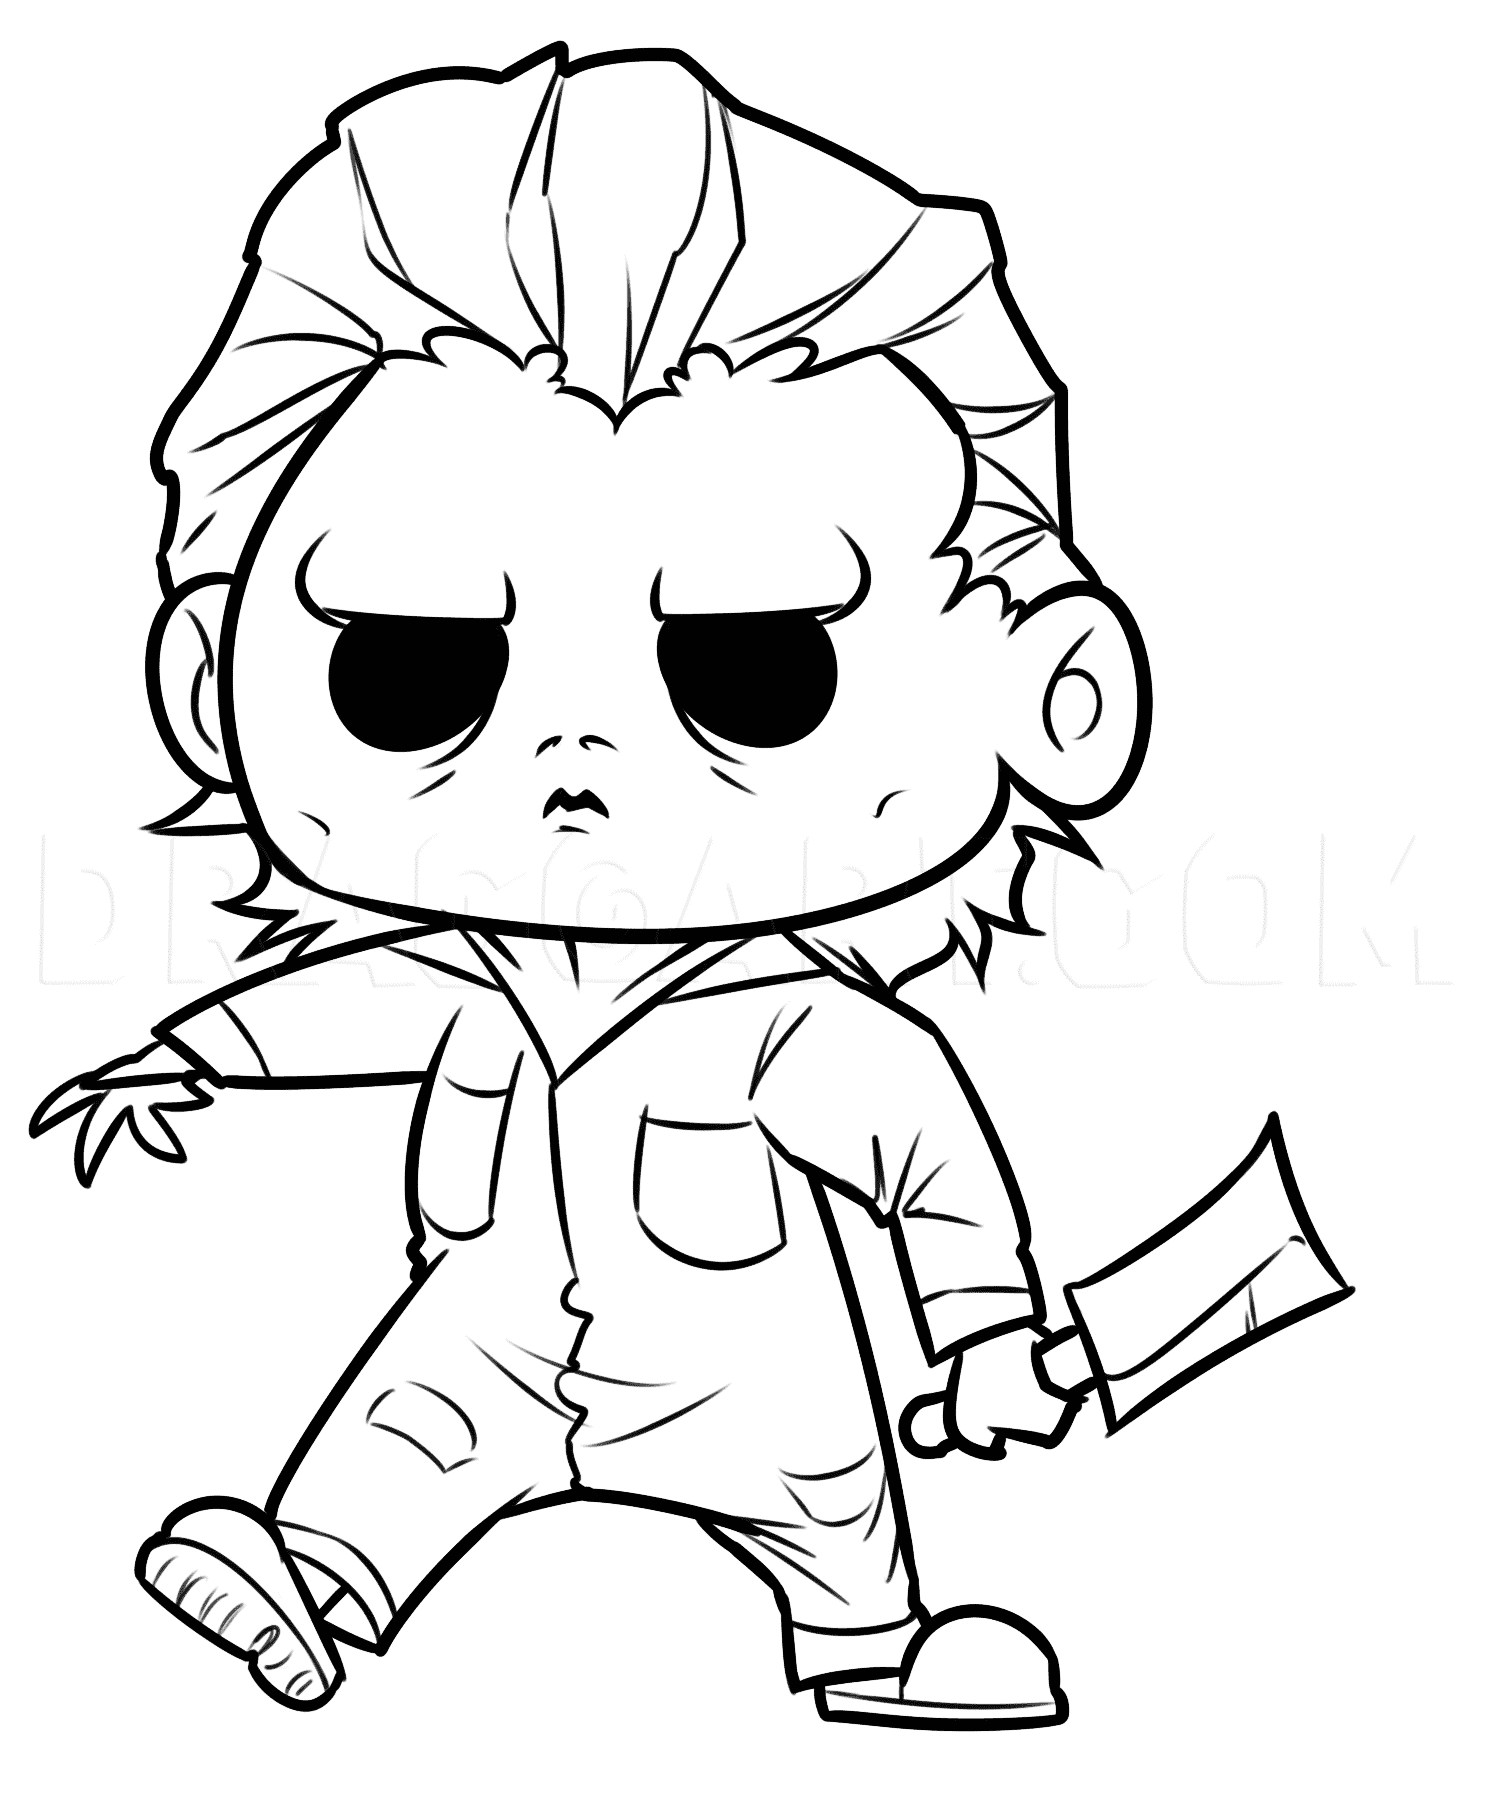 Chibi Michael Myers Coloring Page